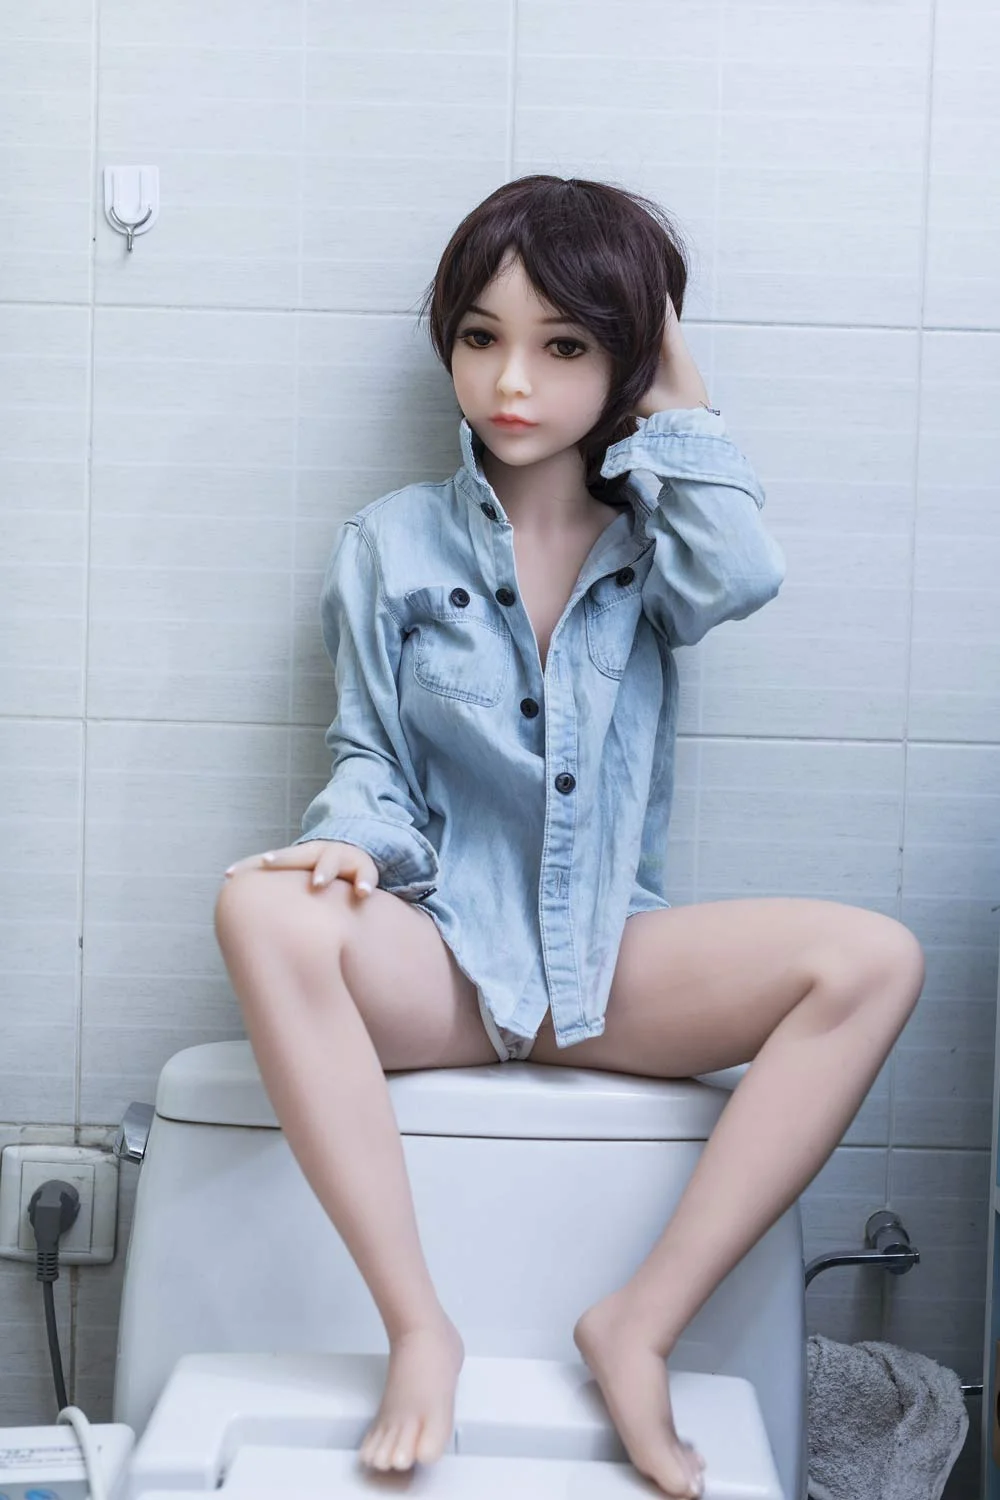 A mini sex doll sitting on the toilet seat and touching his head